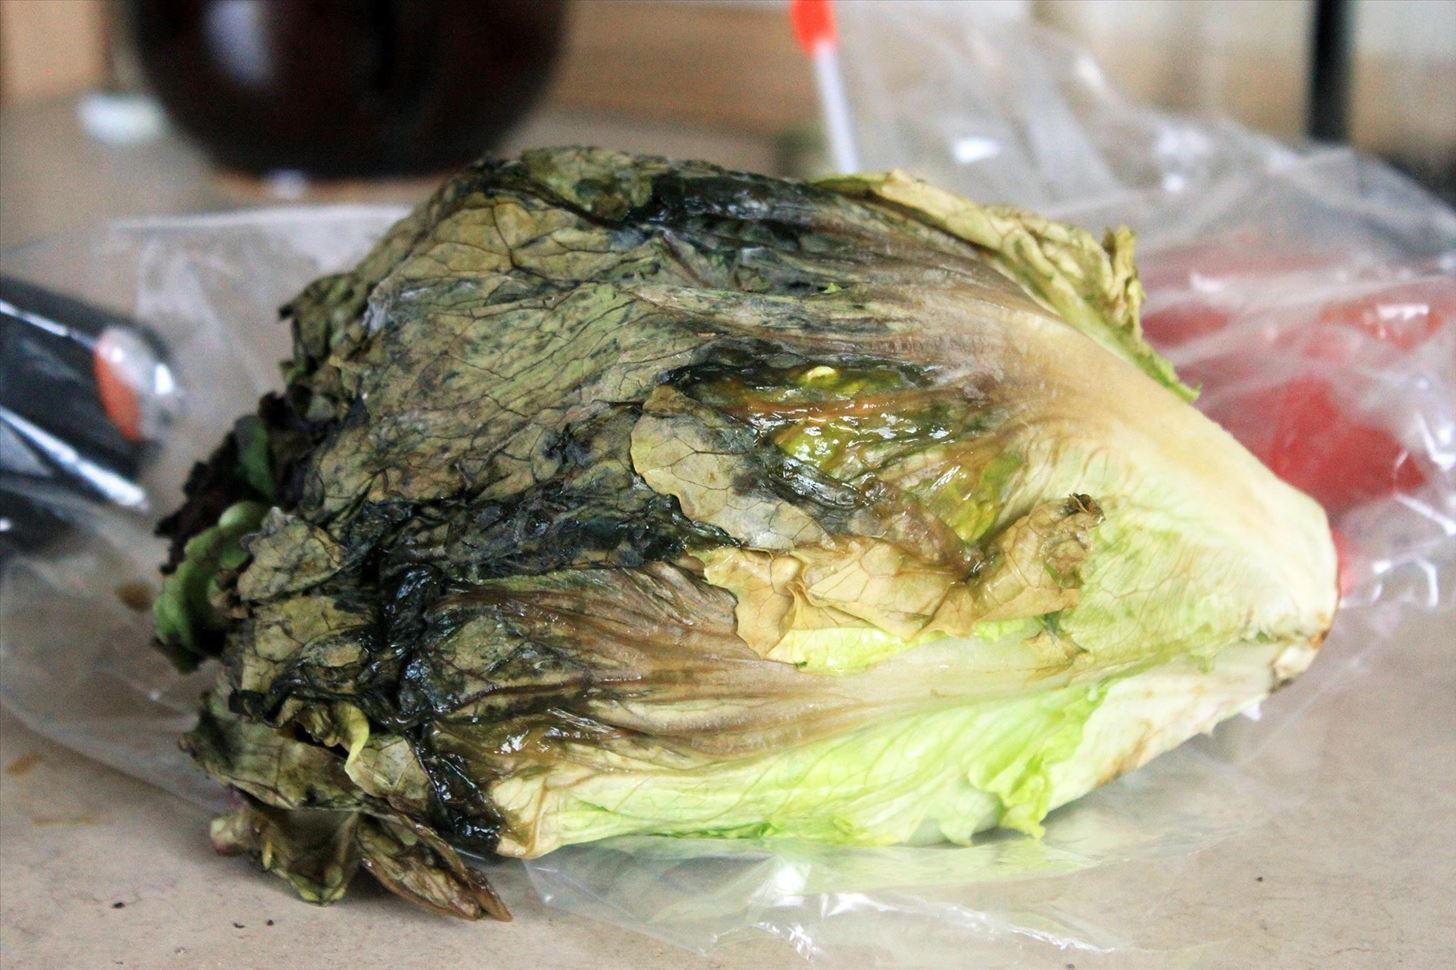 How to Make Soggy, Wilted Lettuce & Other Leafy Greens Edible Again